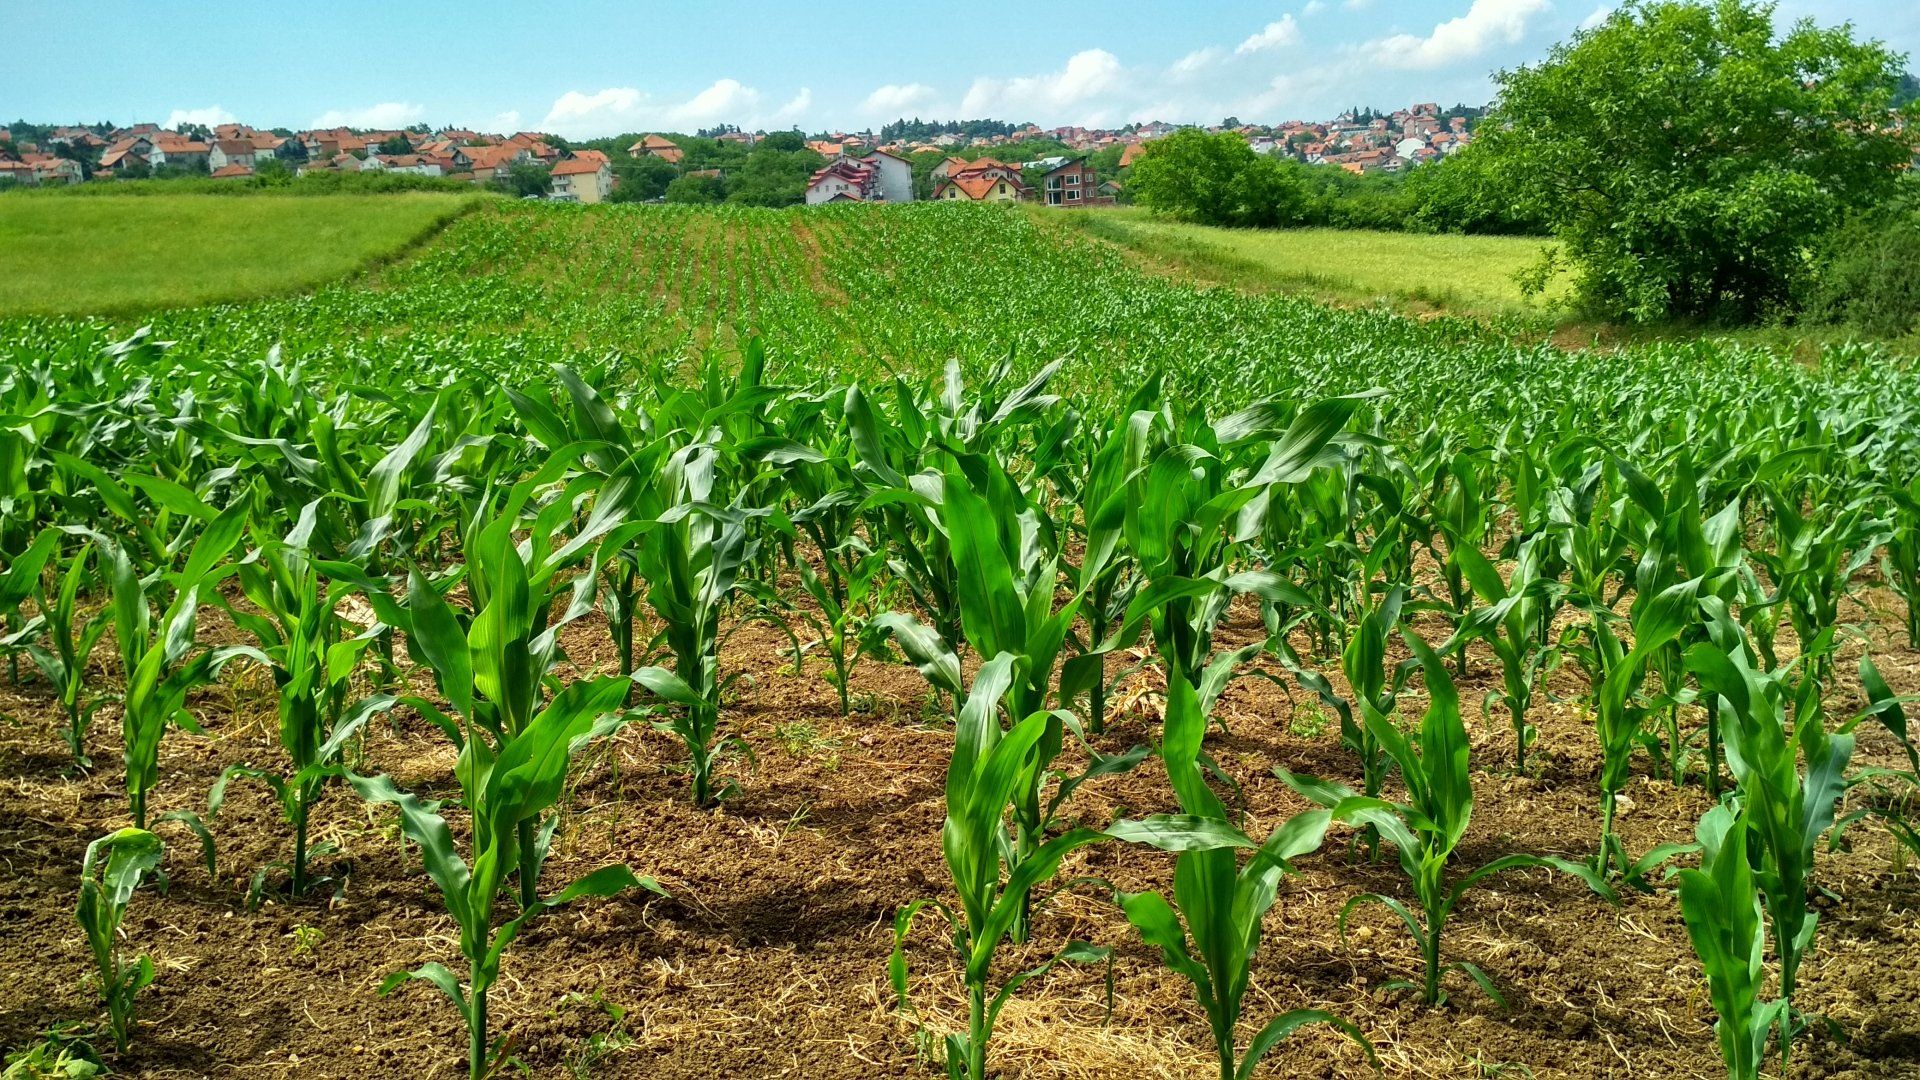 A field of corn plants growing in the dirt on a sunny day.